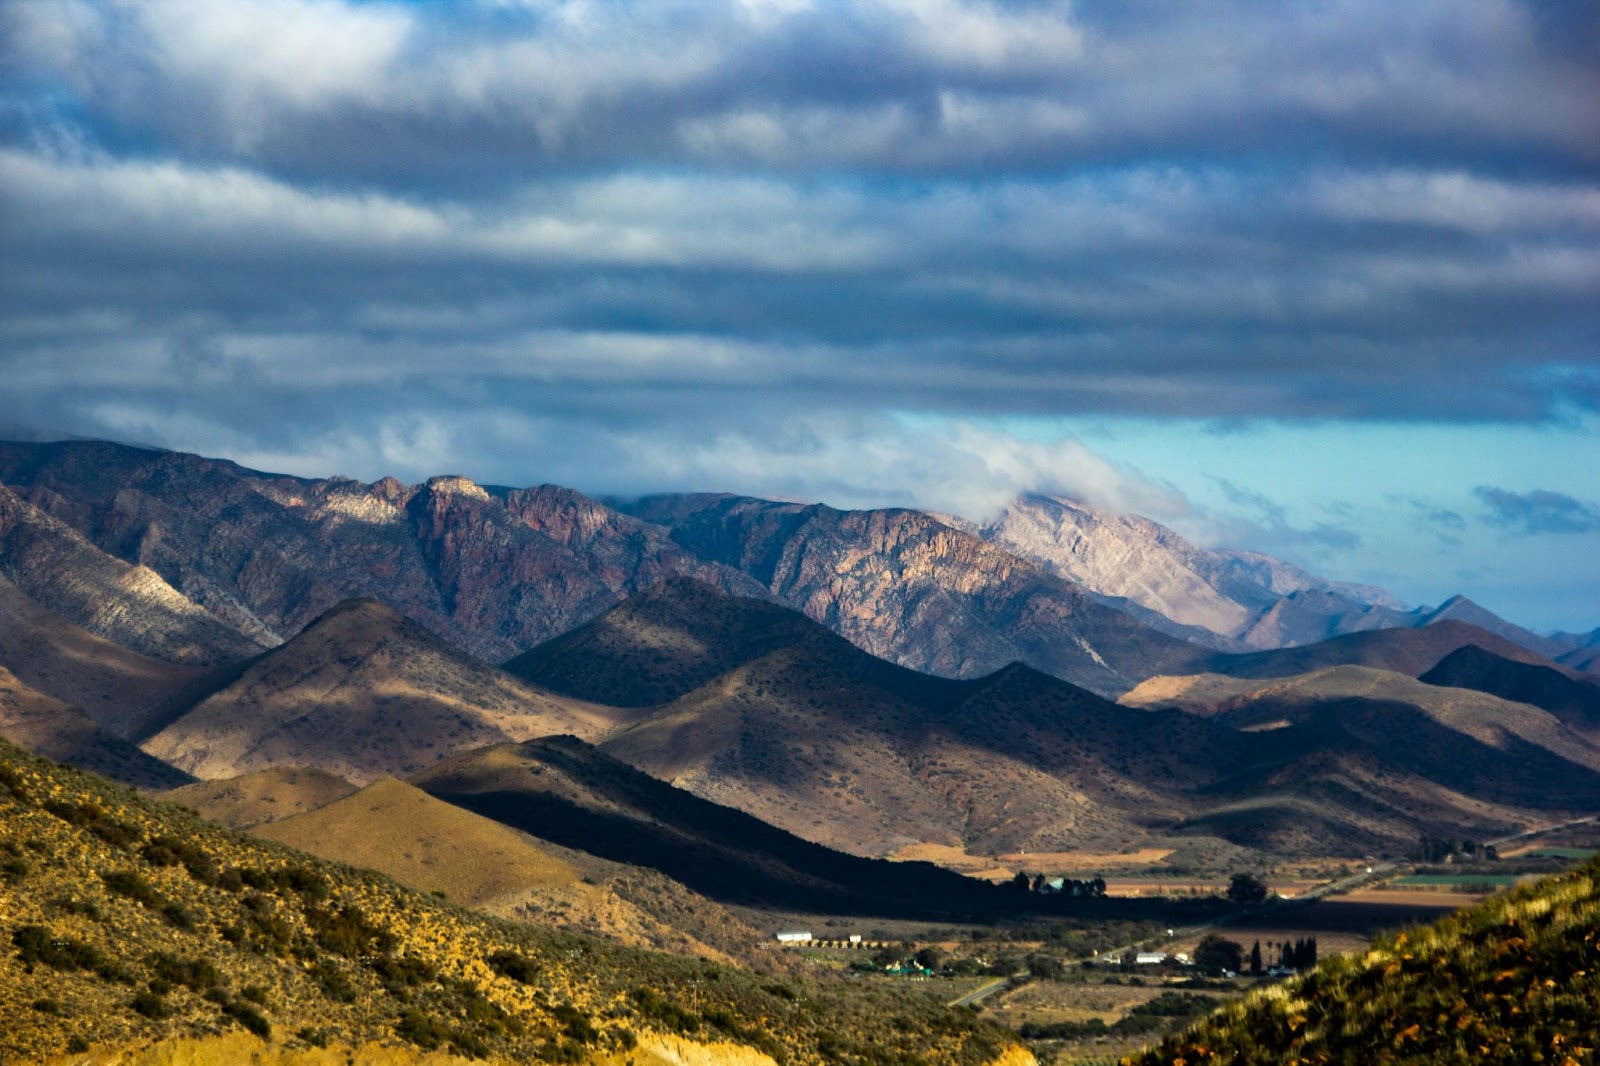 The picturesque landscape of the Karoo